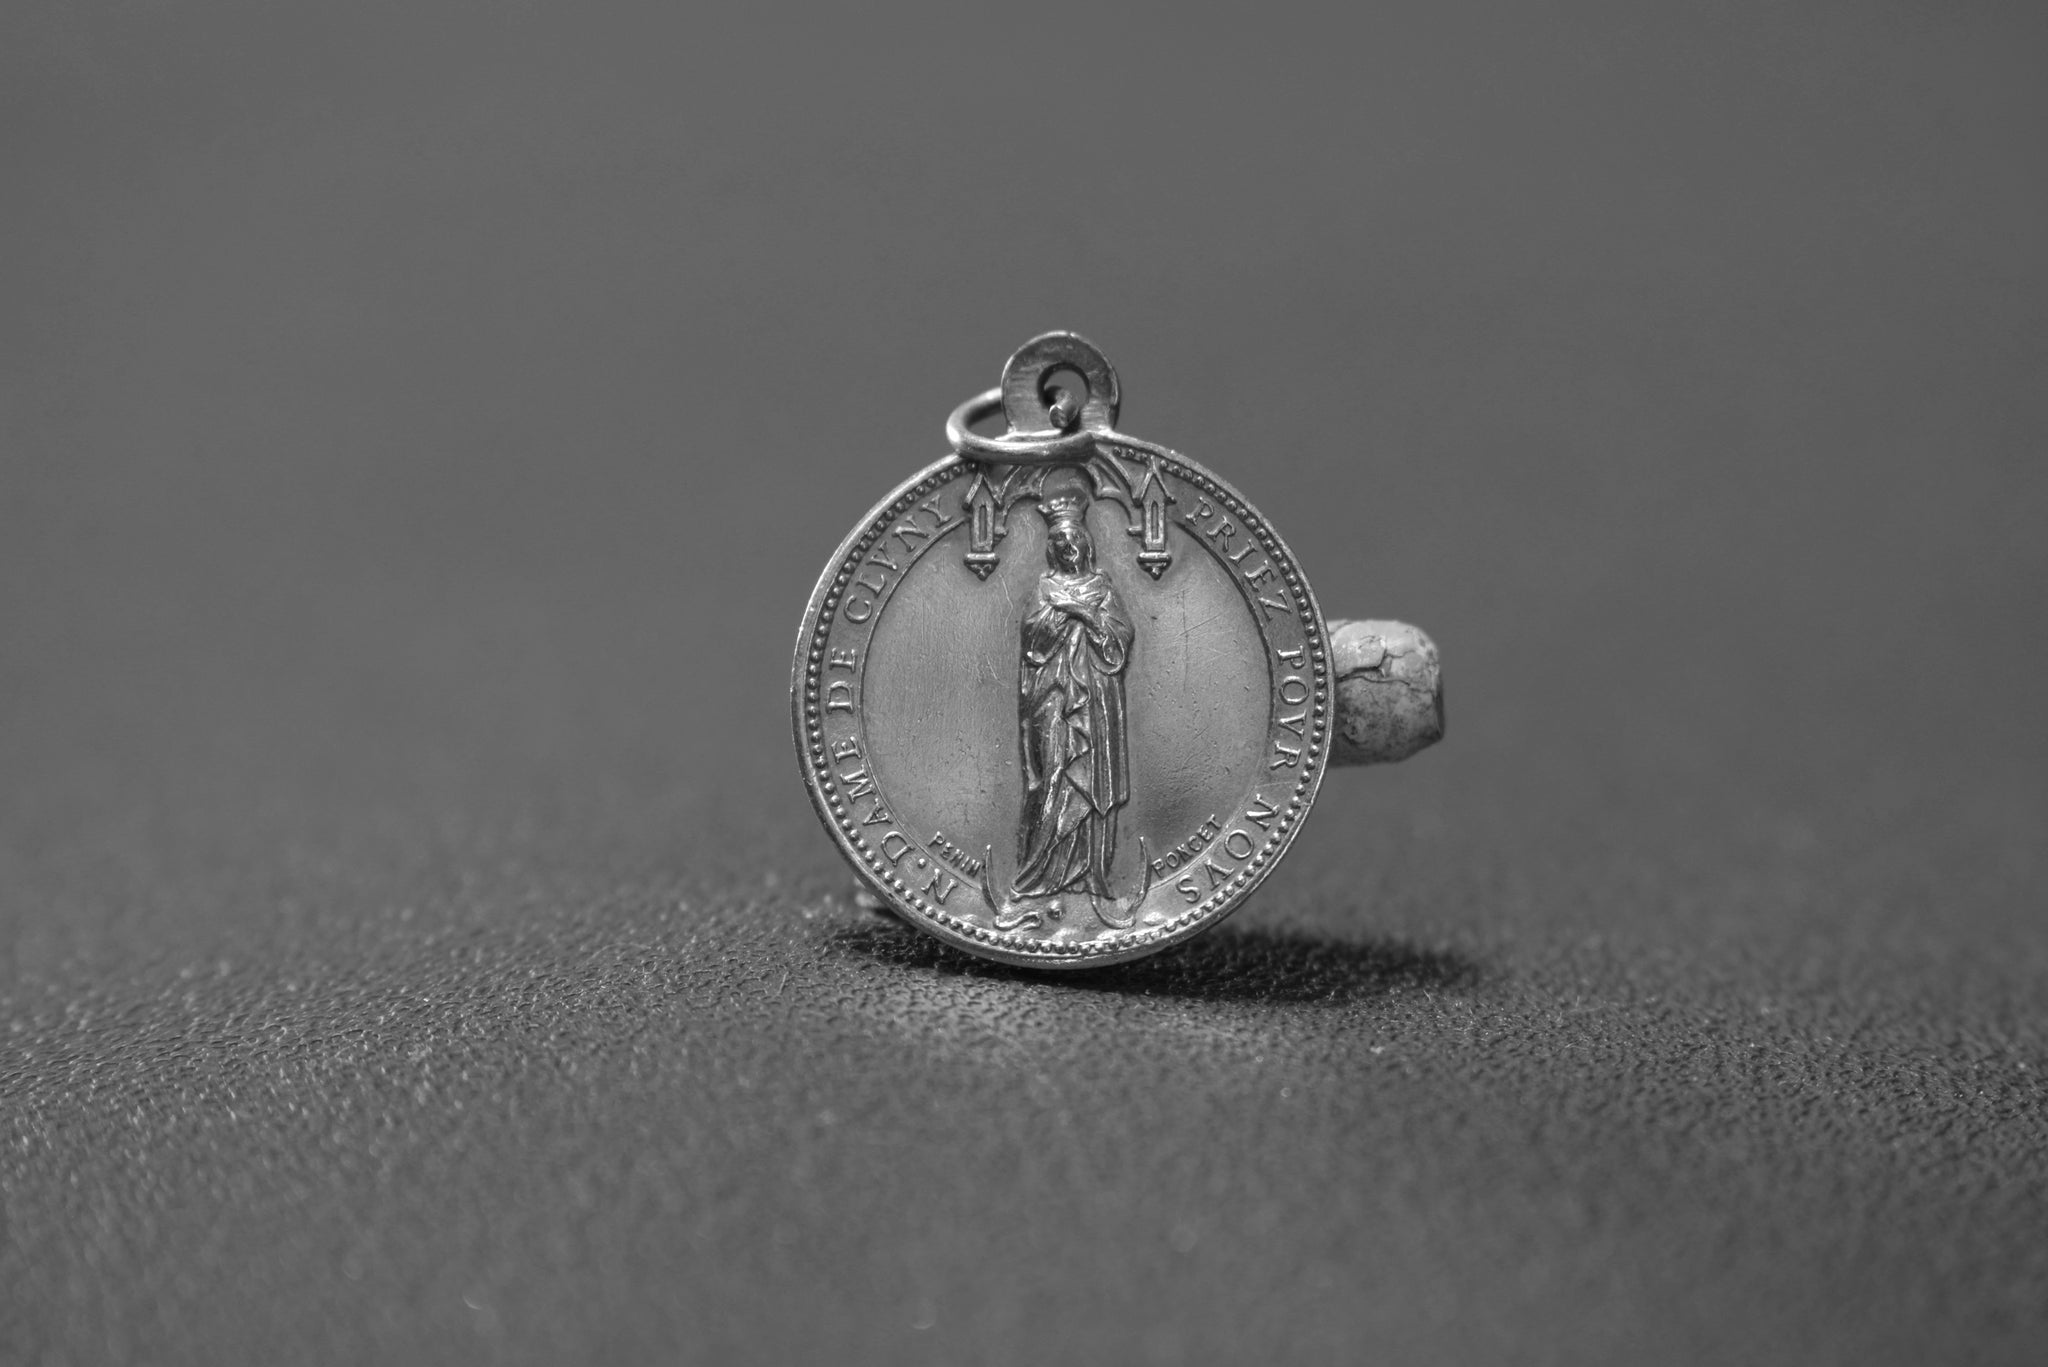 Blessed Lady of Cluny medal by Penin